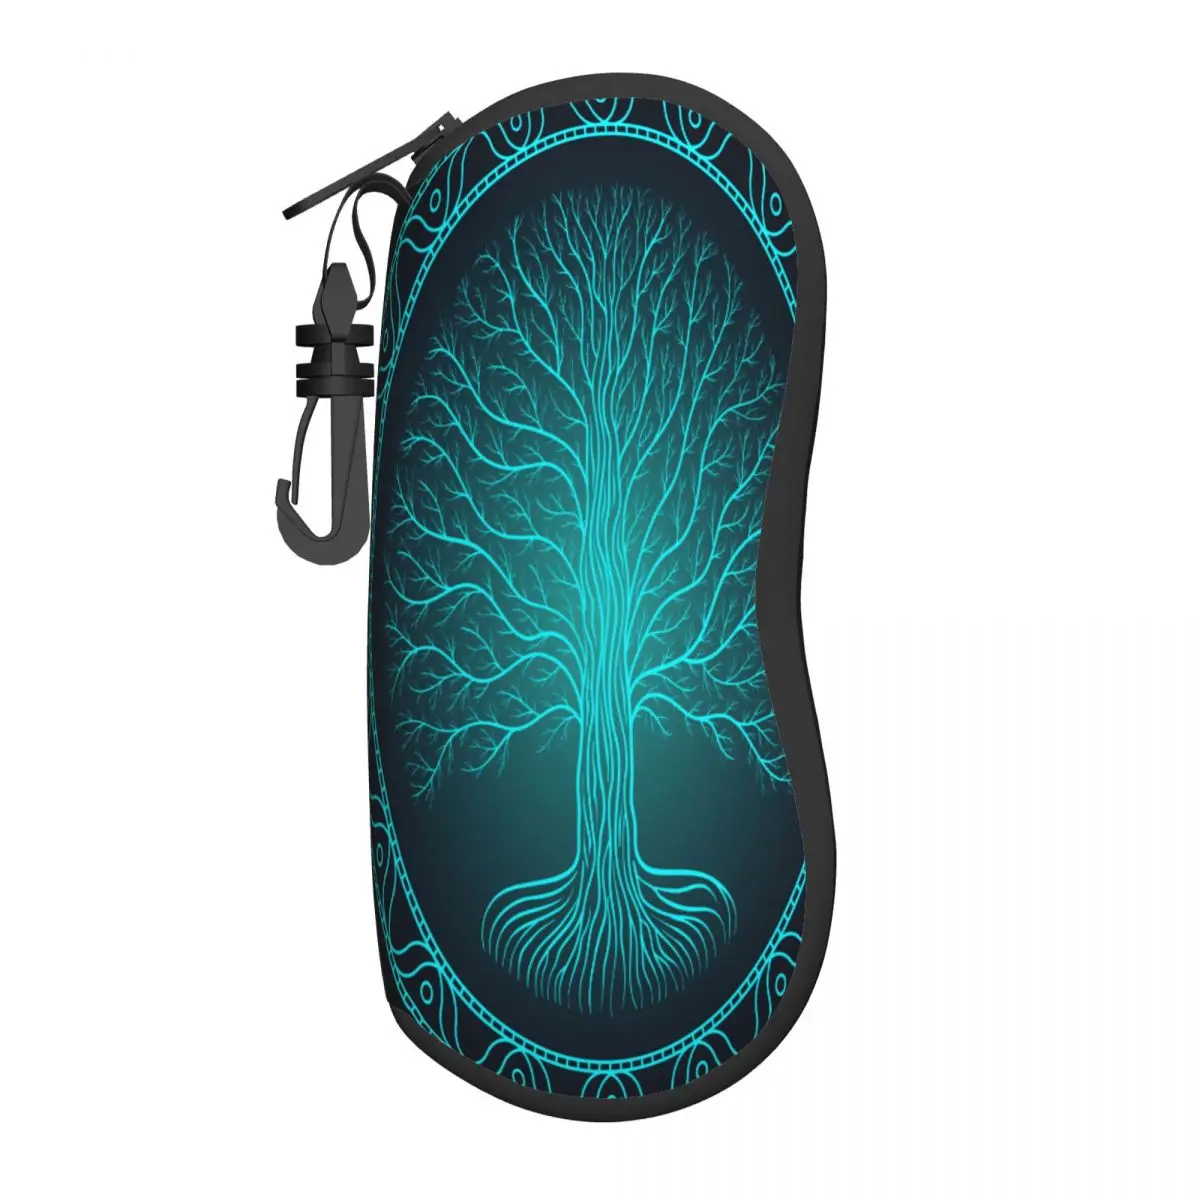 Glasses Case Soft Glasses Bag Ethnic Tree With Branches Middle Eastern Moroccan Arch Retro Art Portable Box Bag Eyeglasses Case